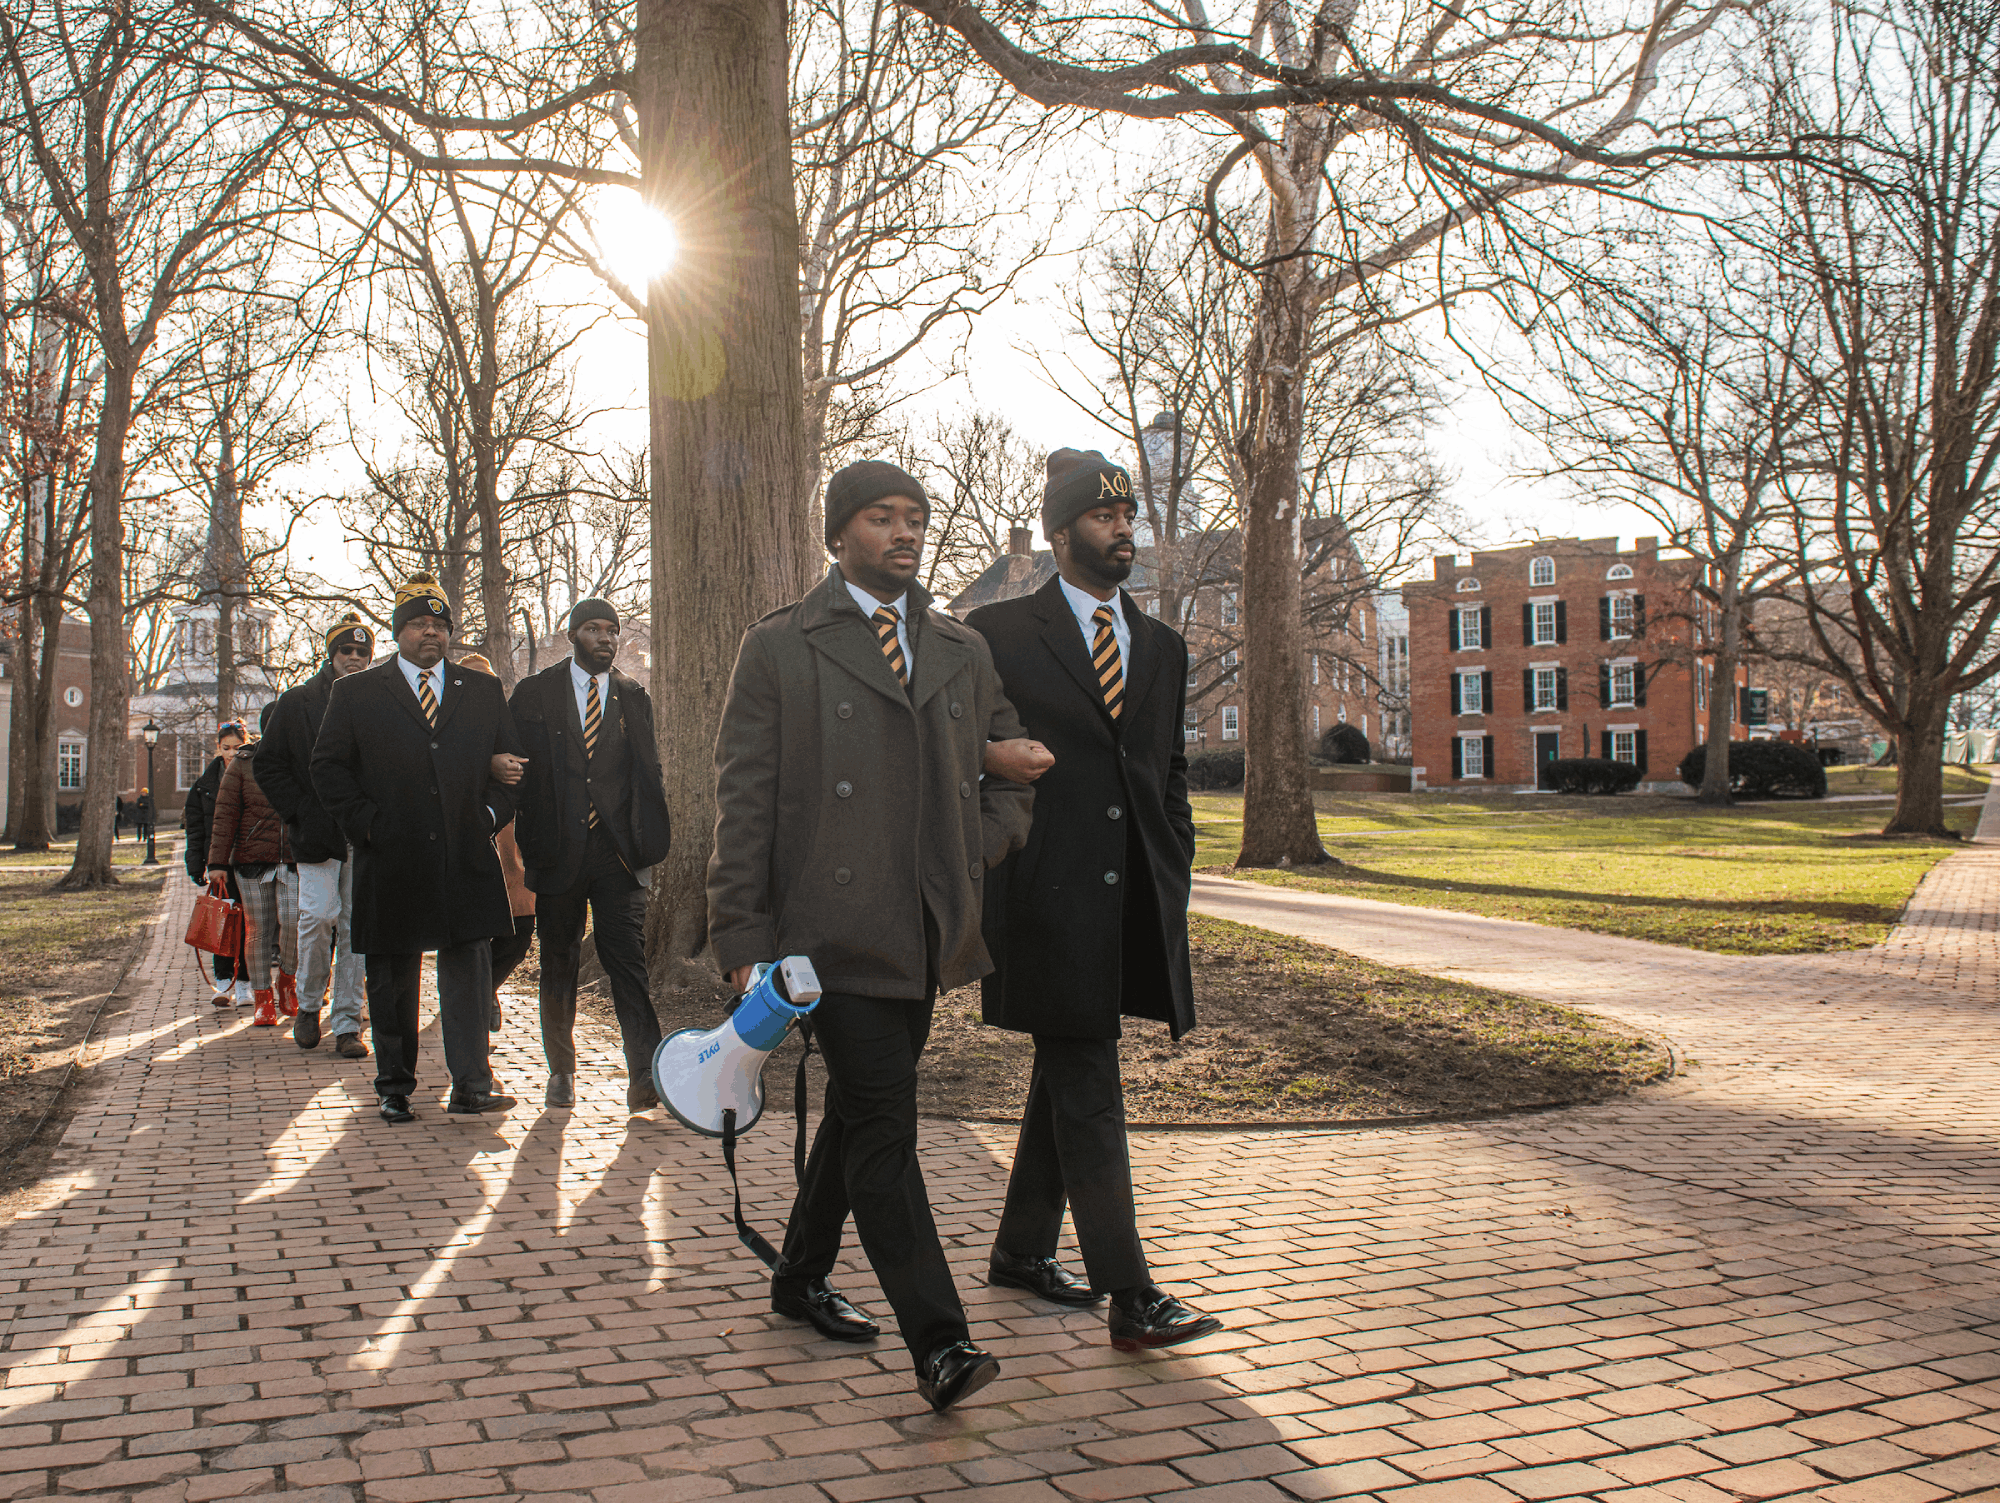 Students lead a silent procession across College Green in honor of Martin Luther King Jr.